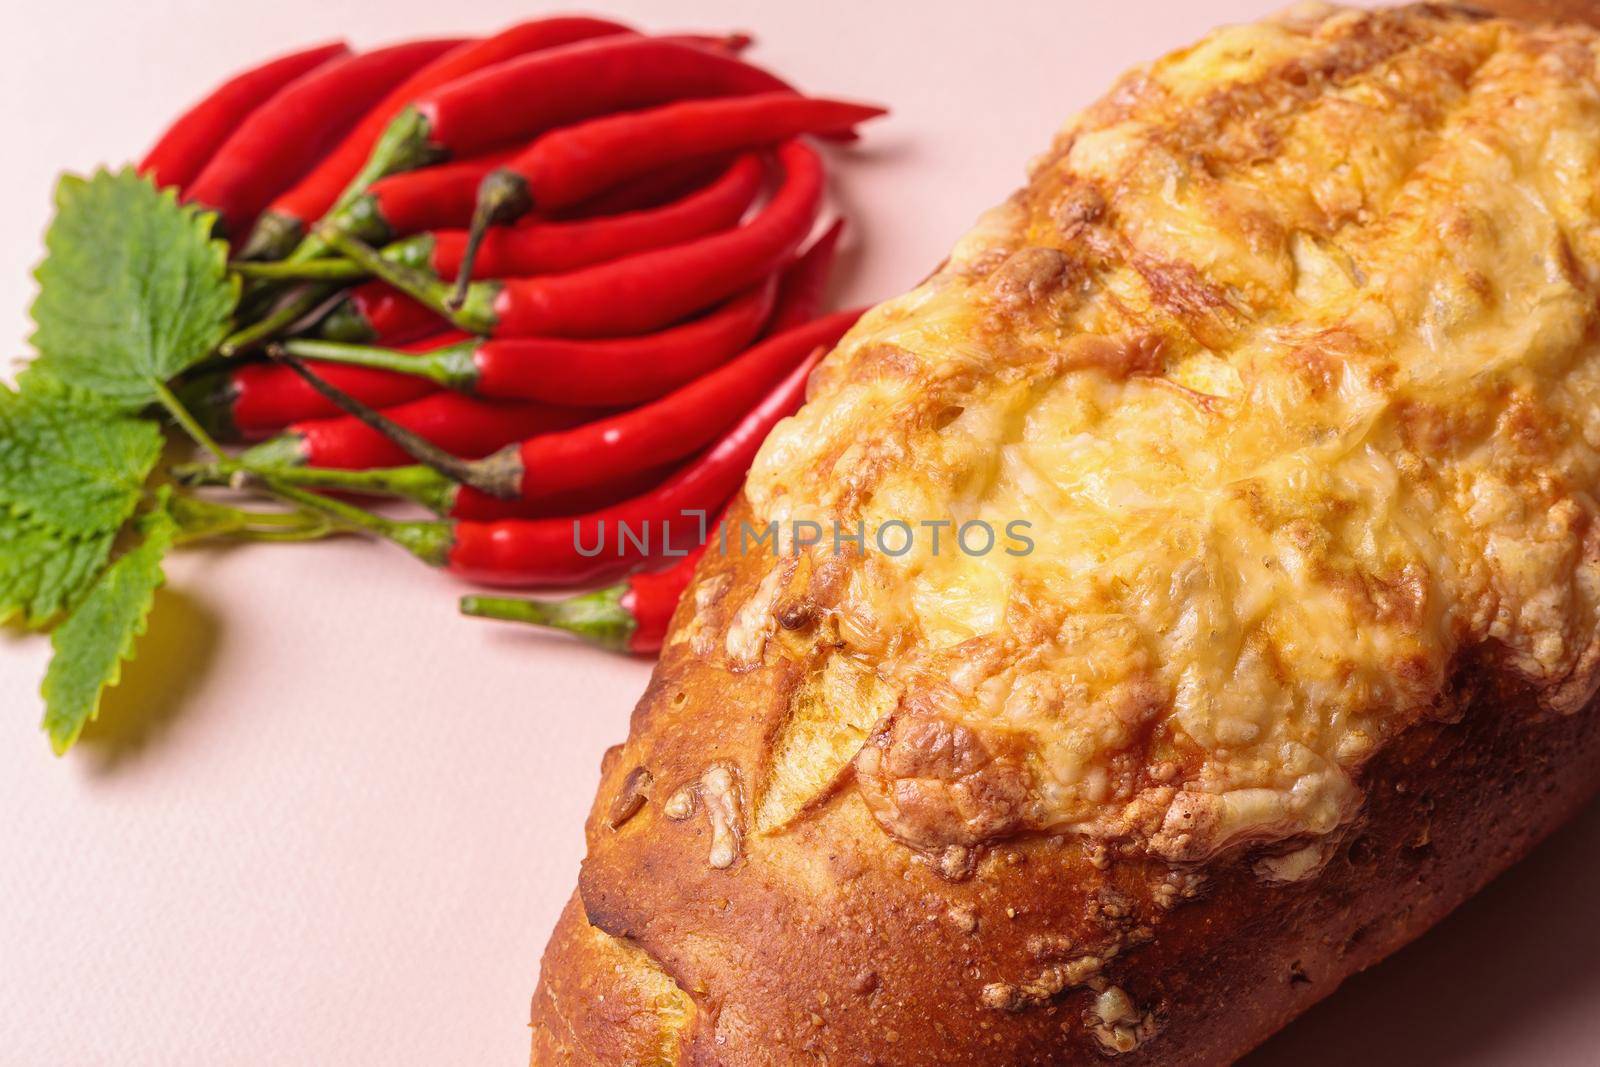 Slide of red chili peppers with green leaves and a loaf of bread. by Yurich32